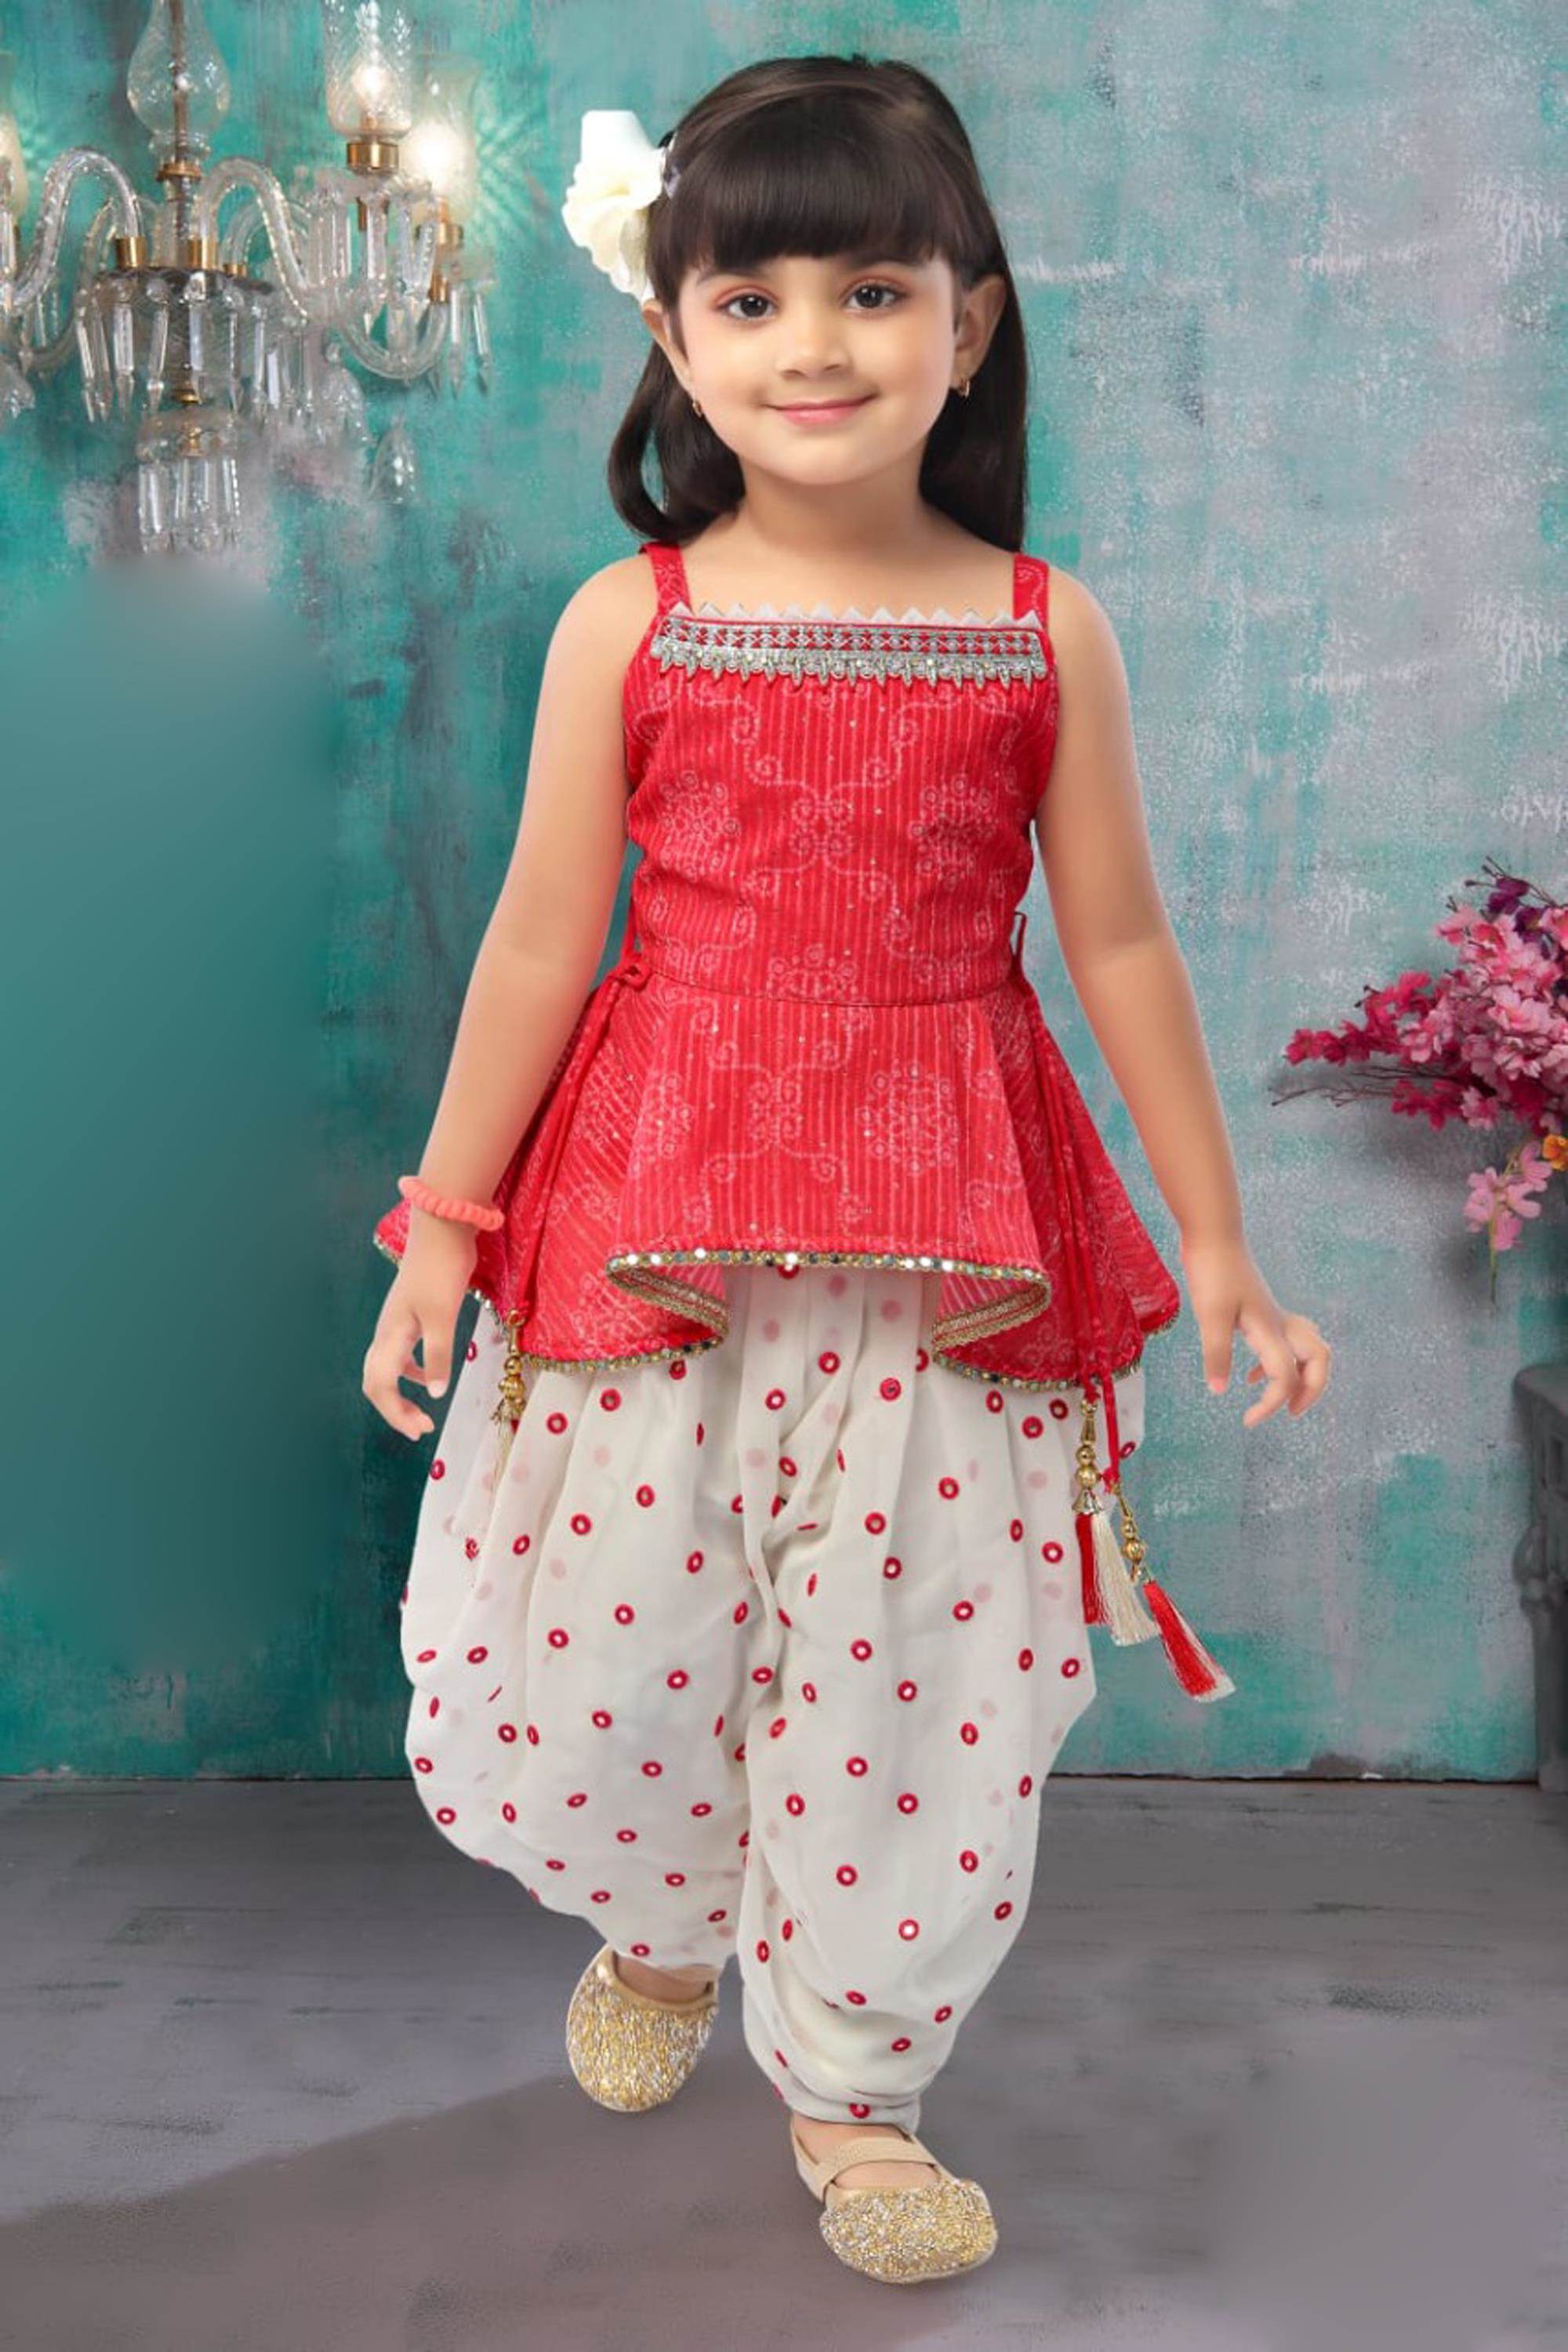 Buy AFIYA Cotton Patiala(Pants) For Kids Combo Pack of 3(White,Red,Green)  at Amazon.in